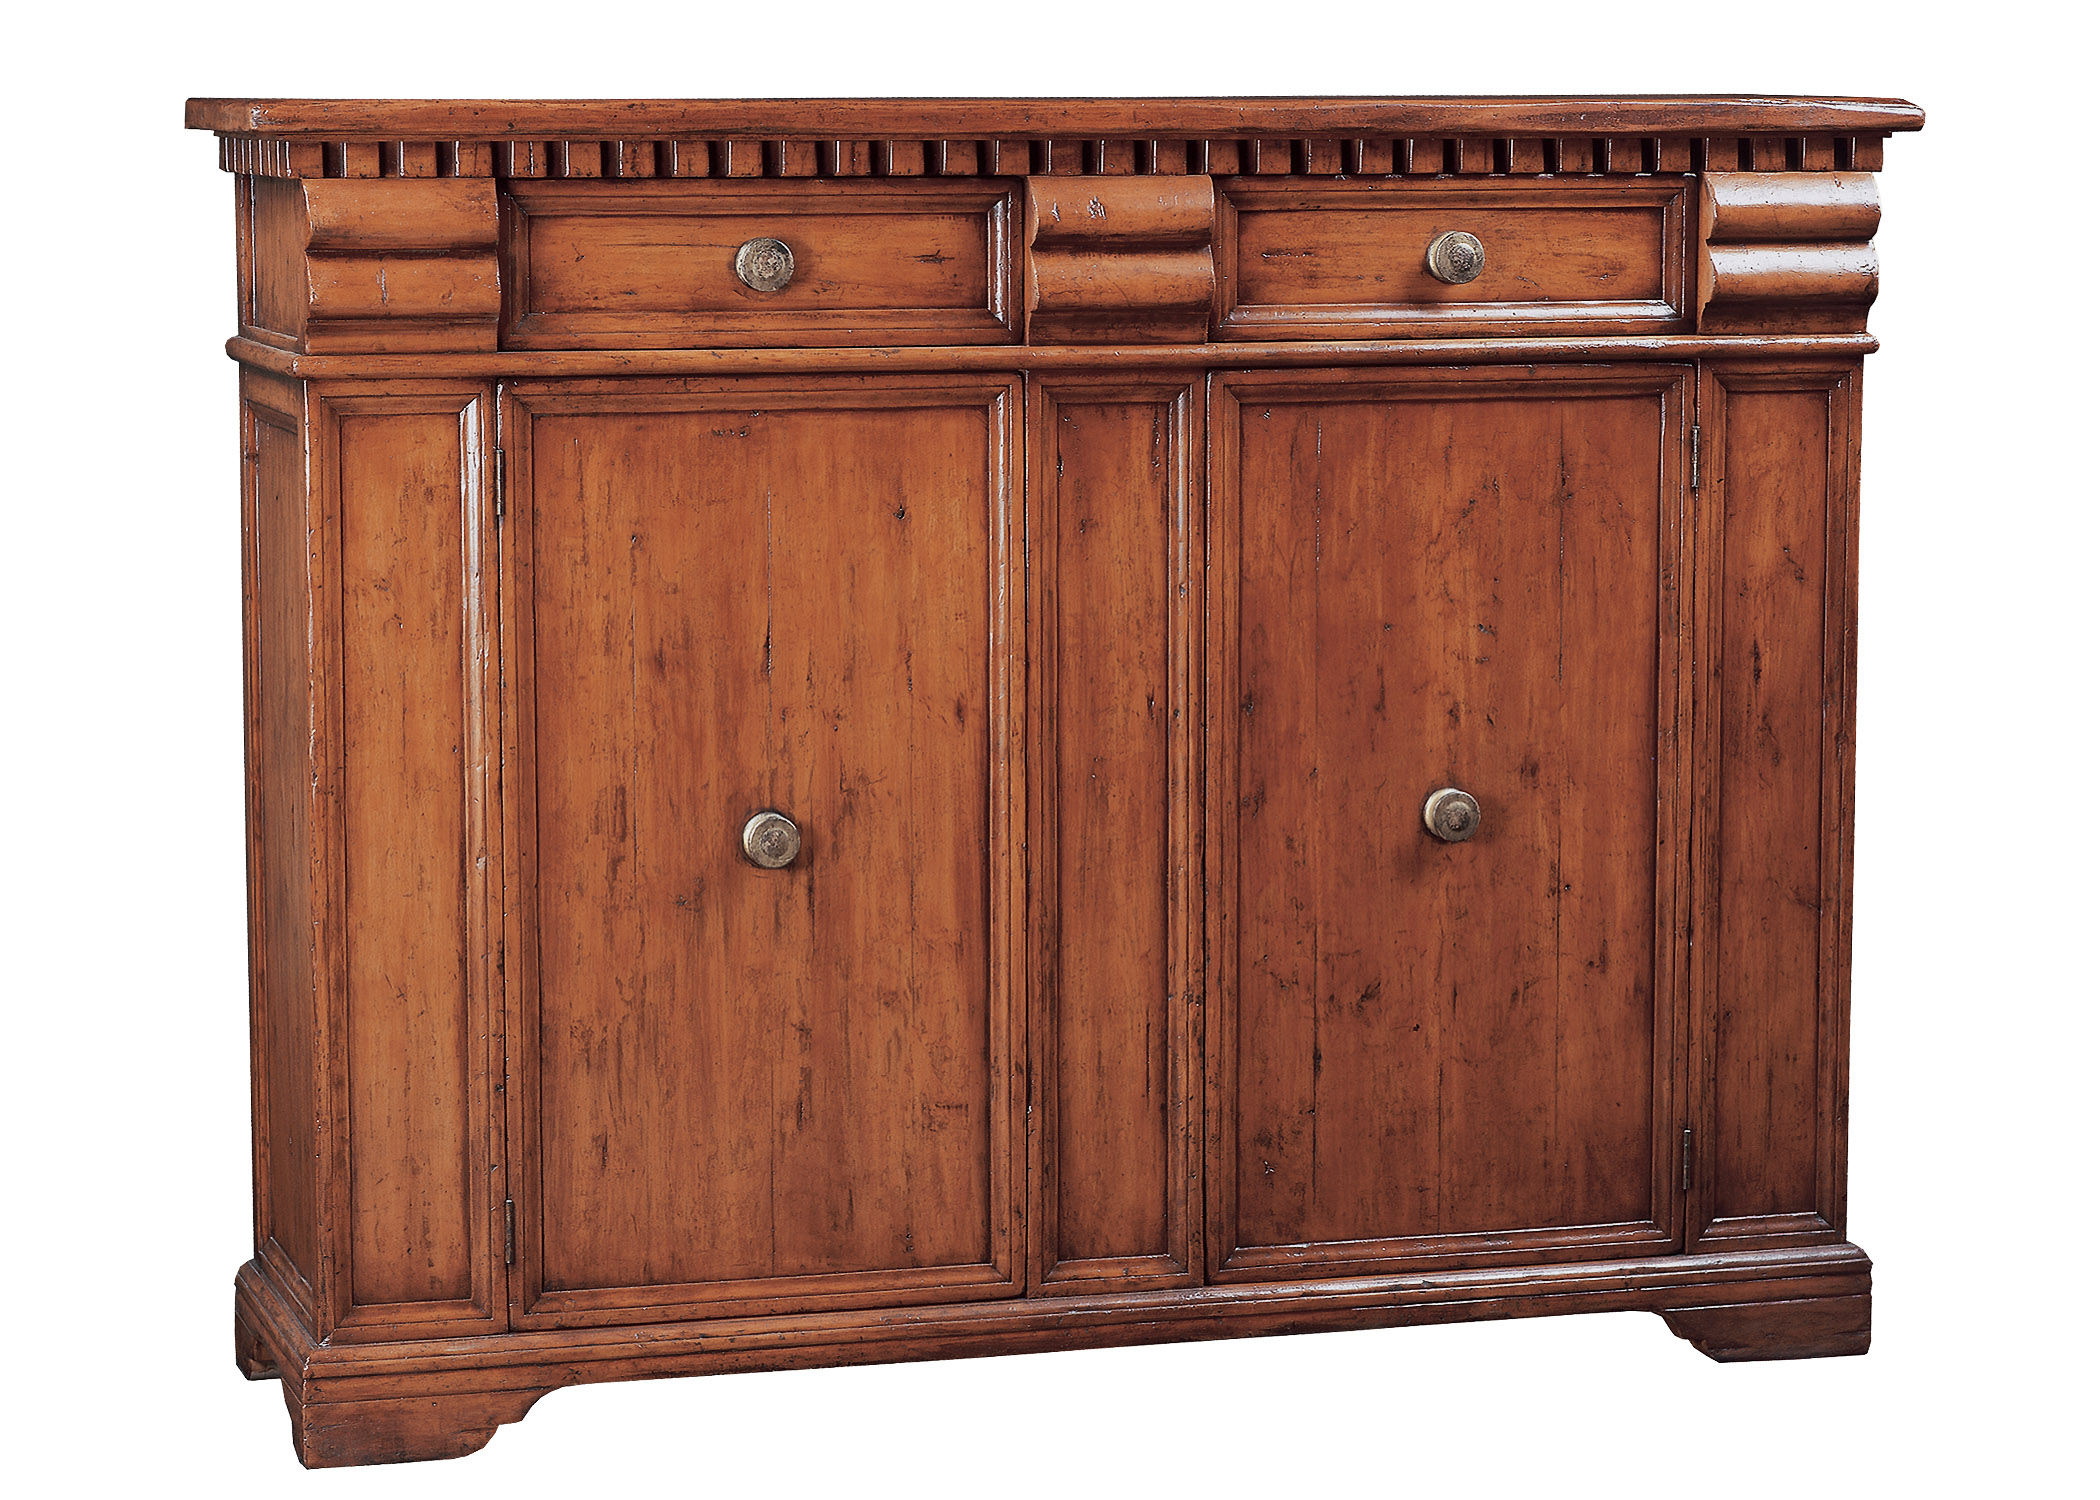 Cambria Sideboard cabinet by Woodland furniture in Idaho Falls